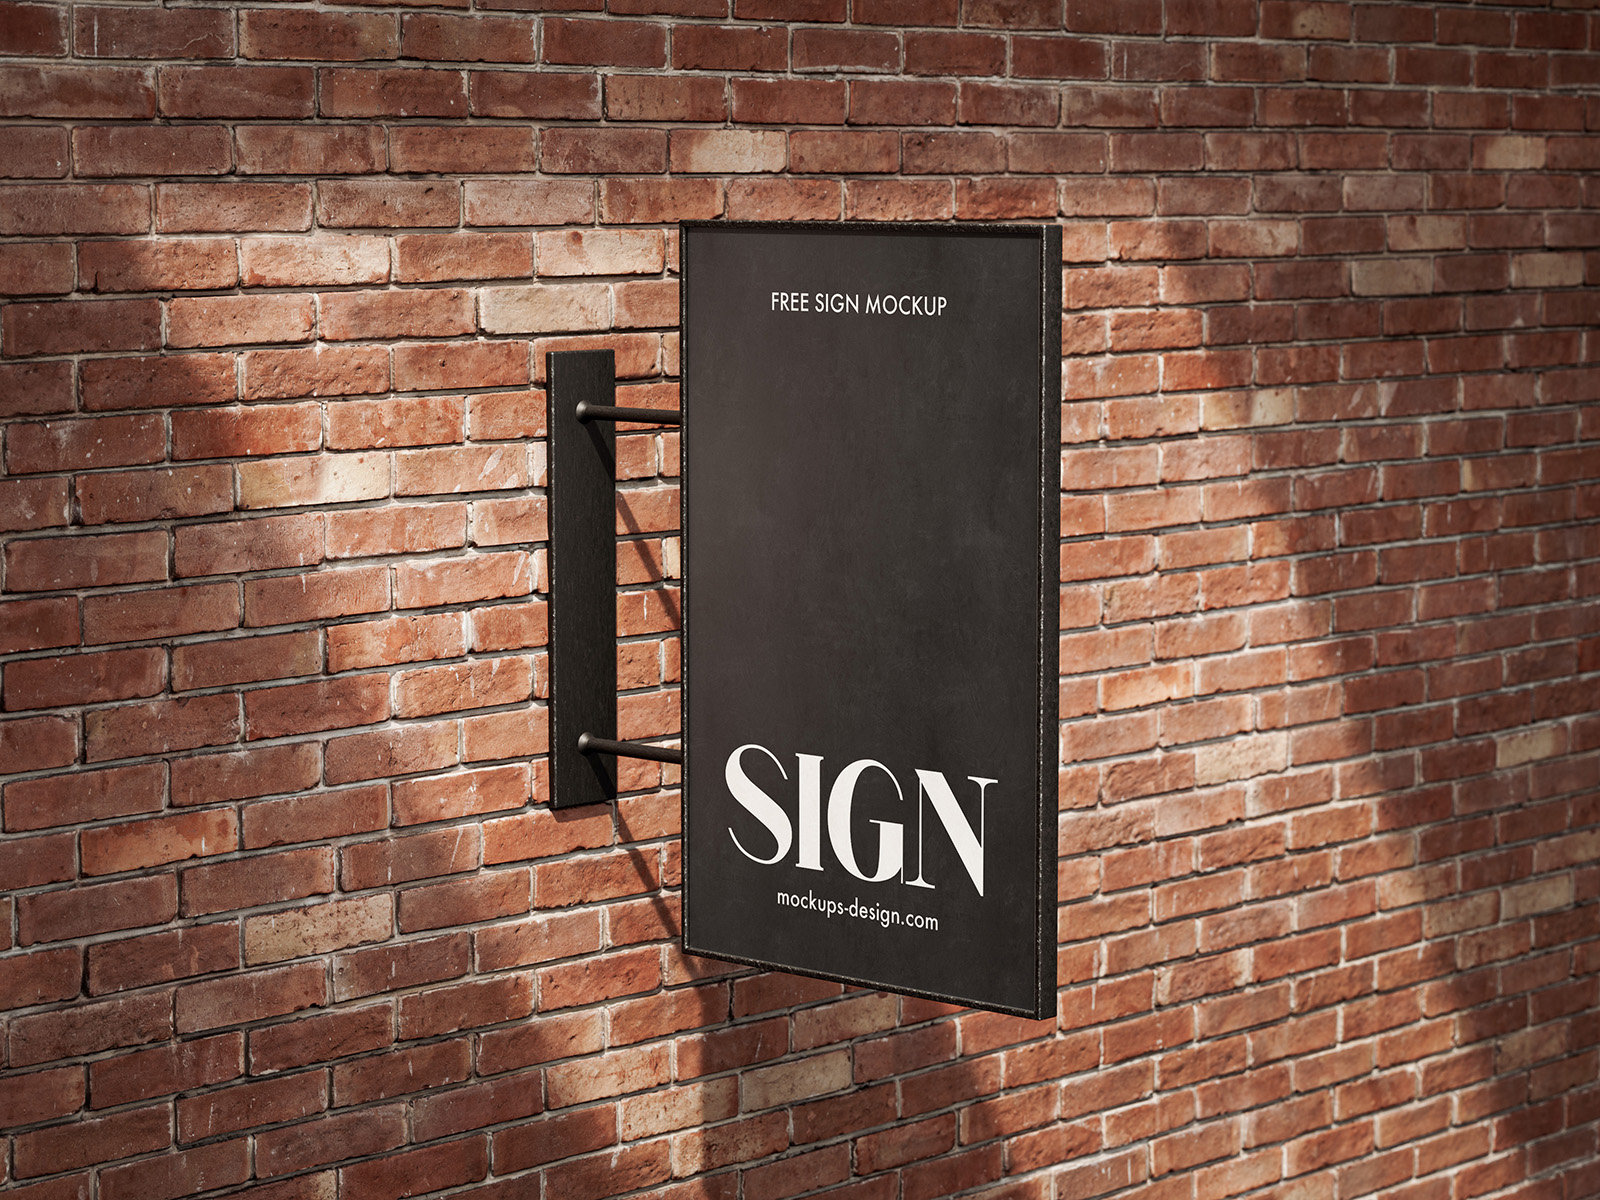 Perspective Sight of 2 Street Sign Mockups on Brick Wall FREE PSD